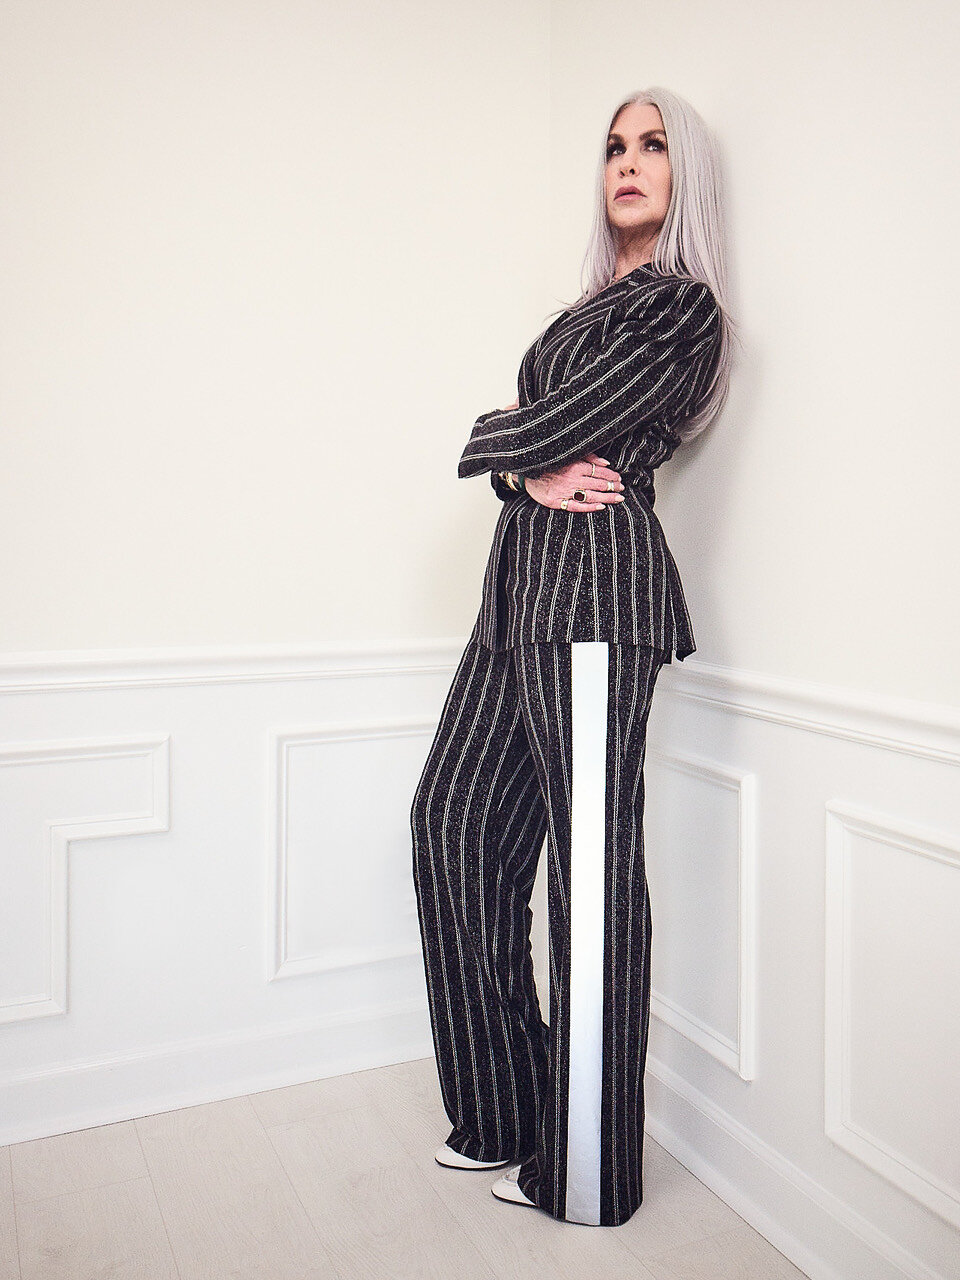 lisa in a pinstripe suit by norma komali